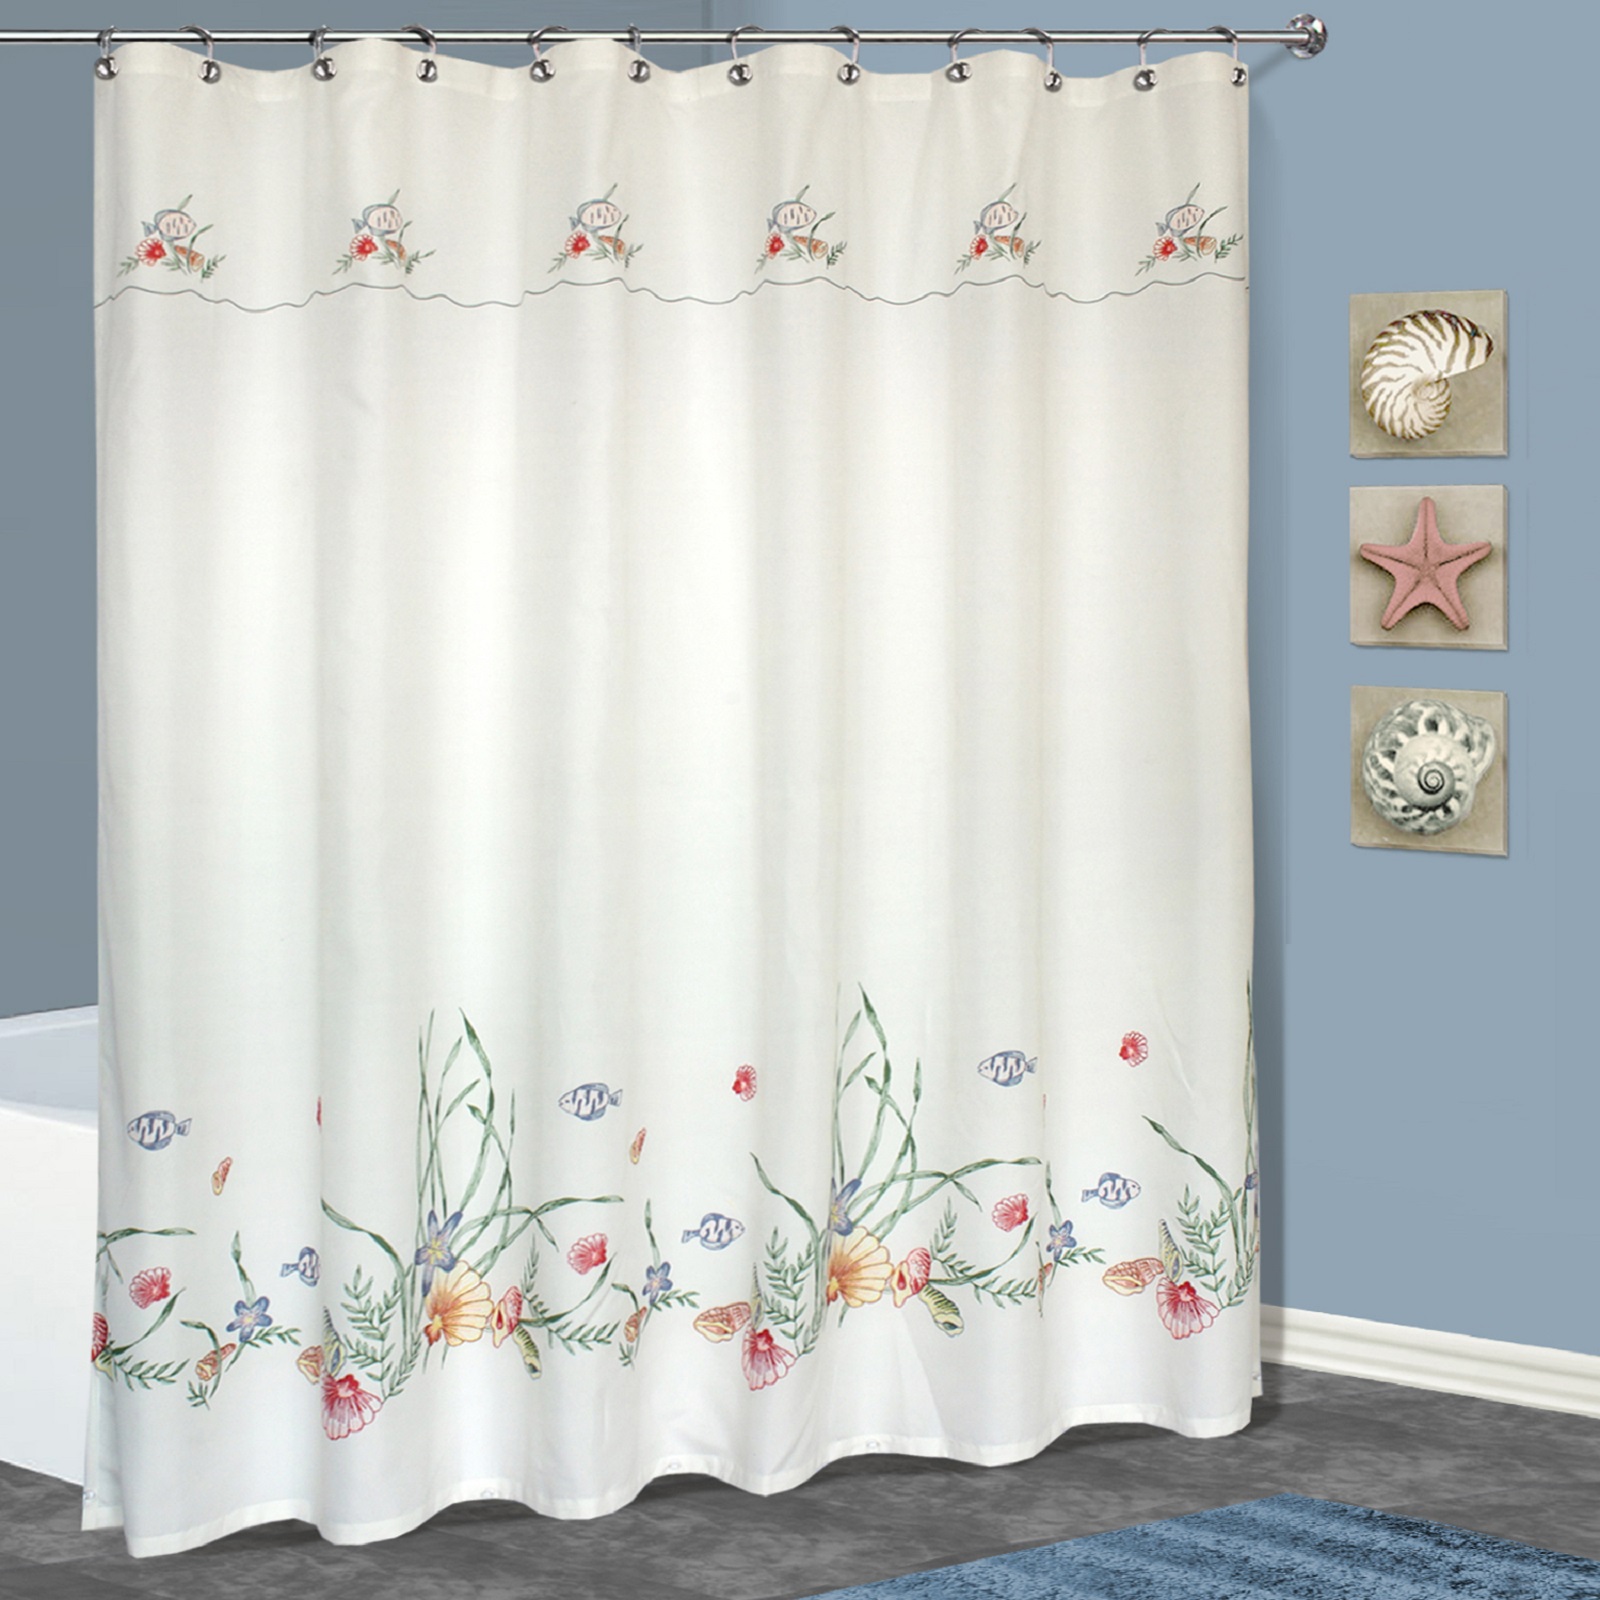 Nature Inspired Shower Curtains IKEA Shower Curtains Fabric